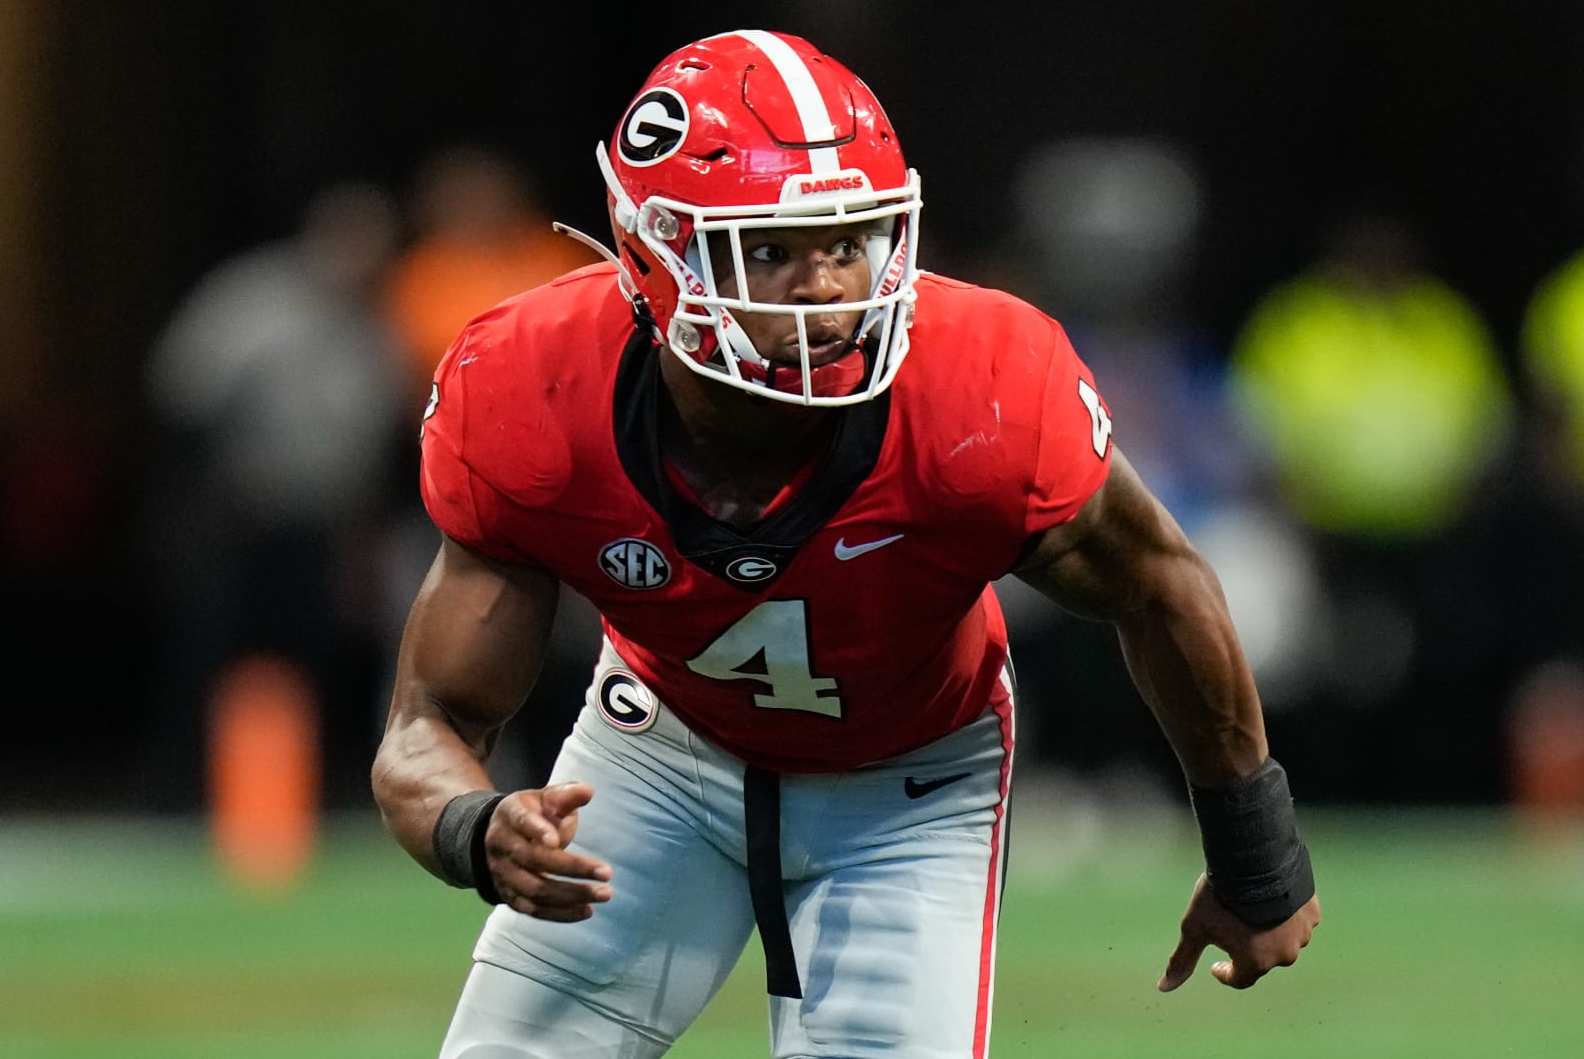 2023 NFL mock draft 8.0: One last attempt at predicting a mystery